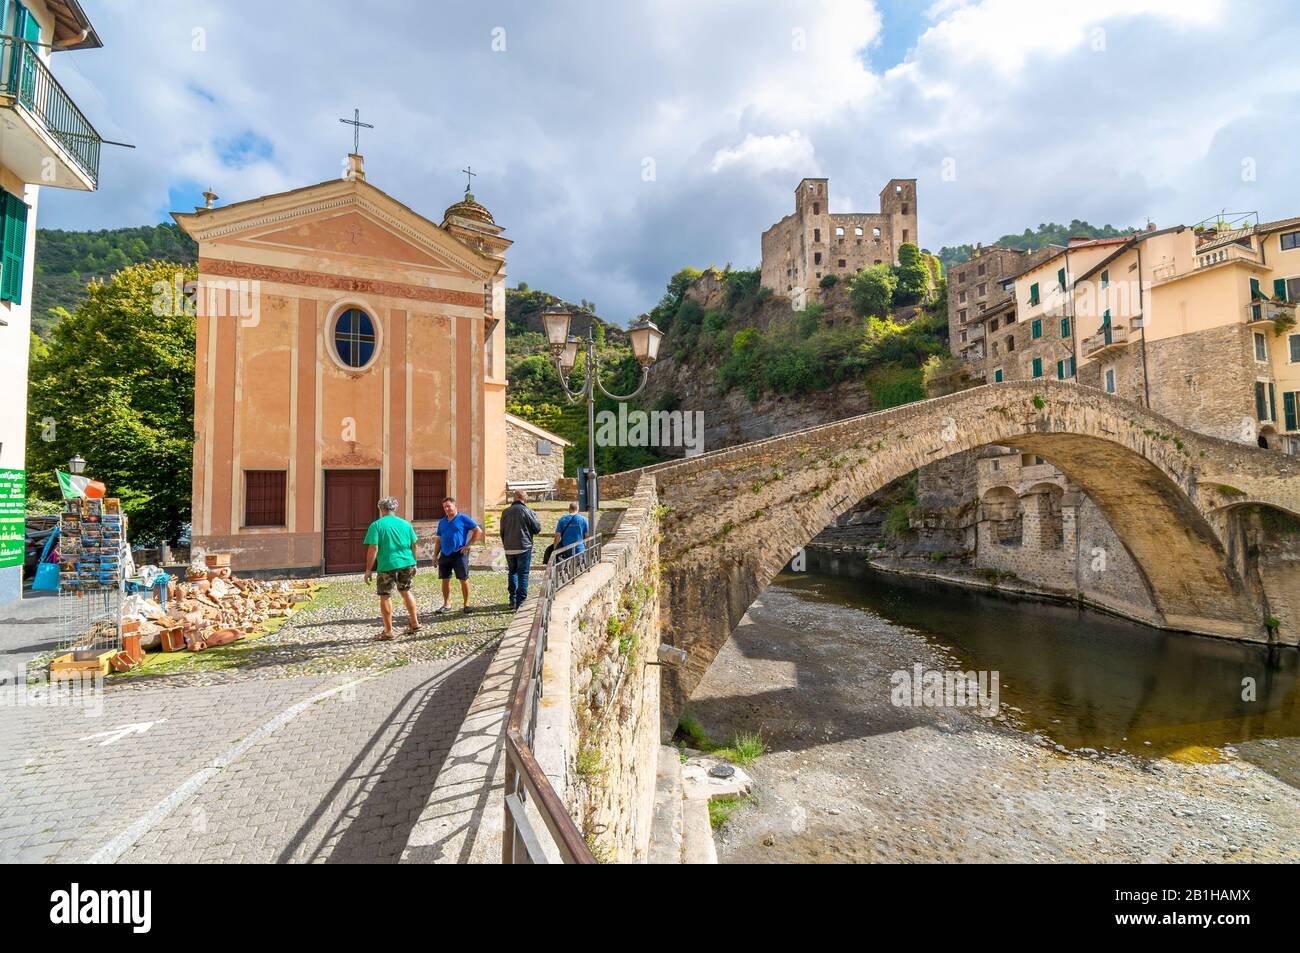 Italian men work construction next to the San Filippo Church with the ancient arched bridge and castle in view in medieval village of Dolceacqua Italy Stock Photo